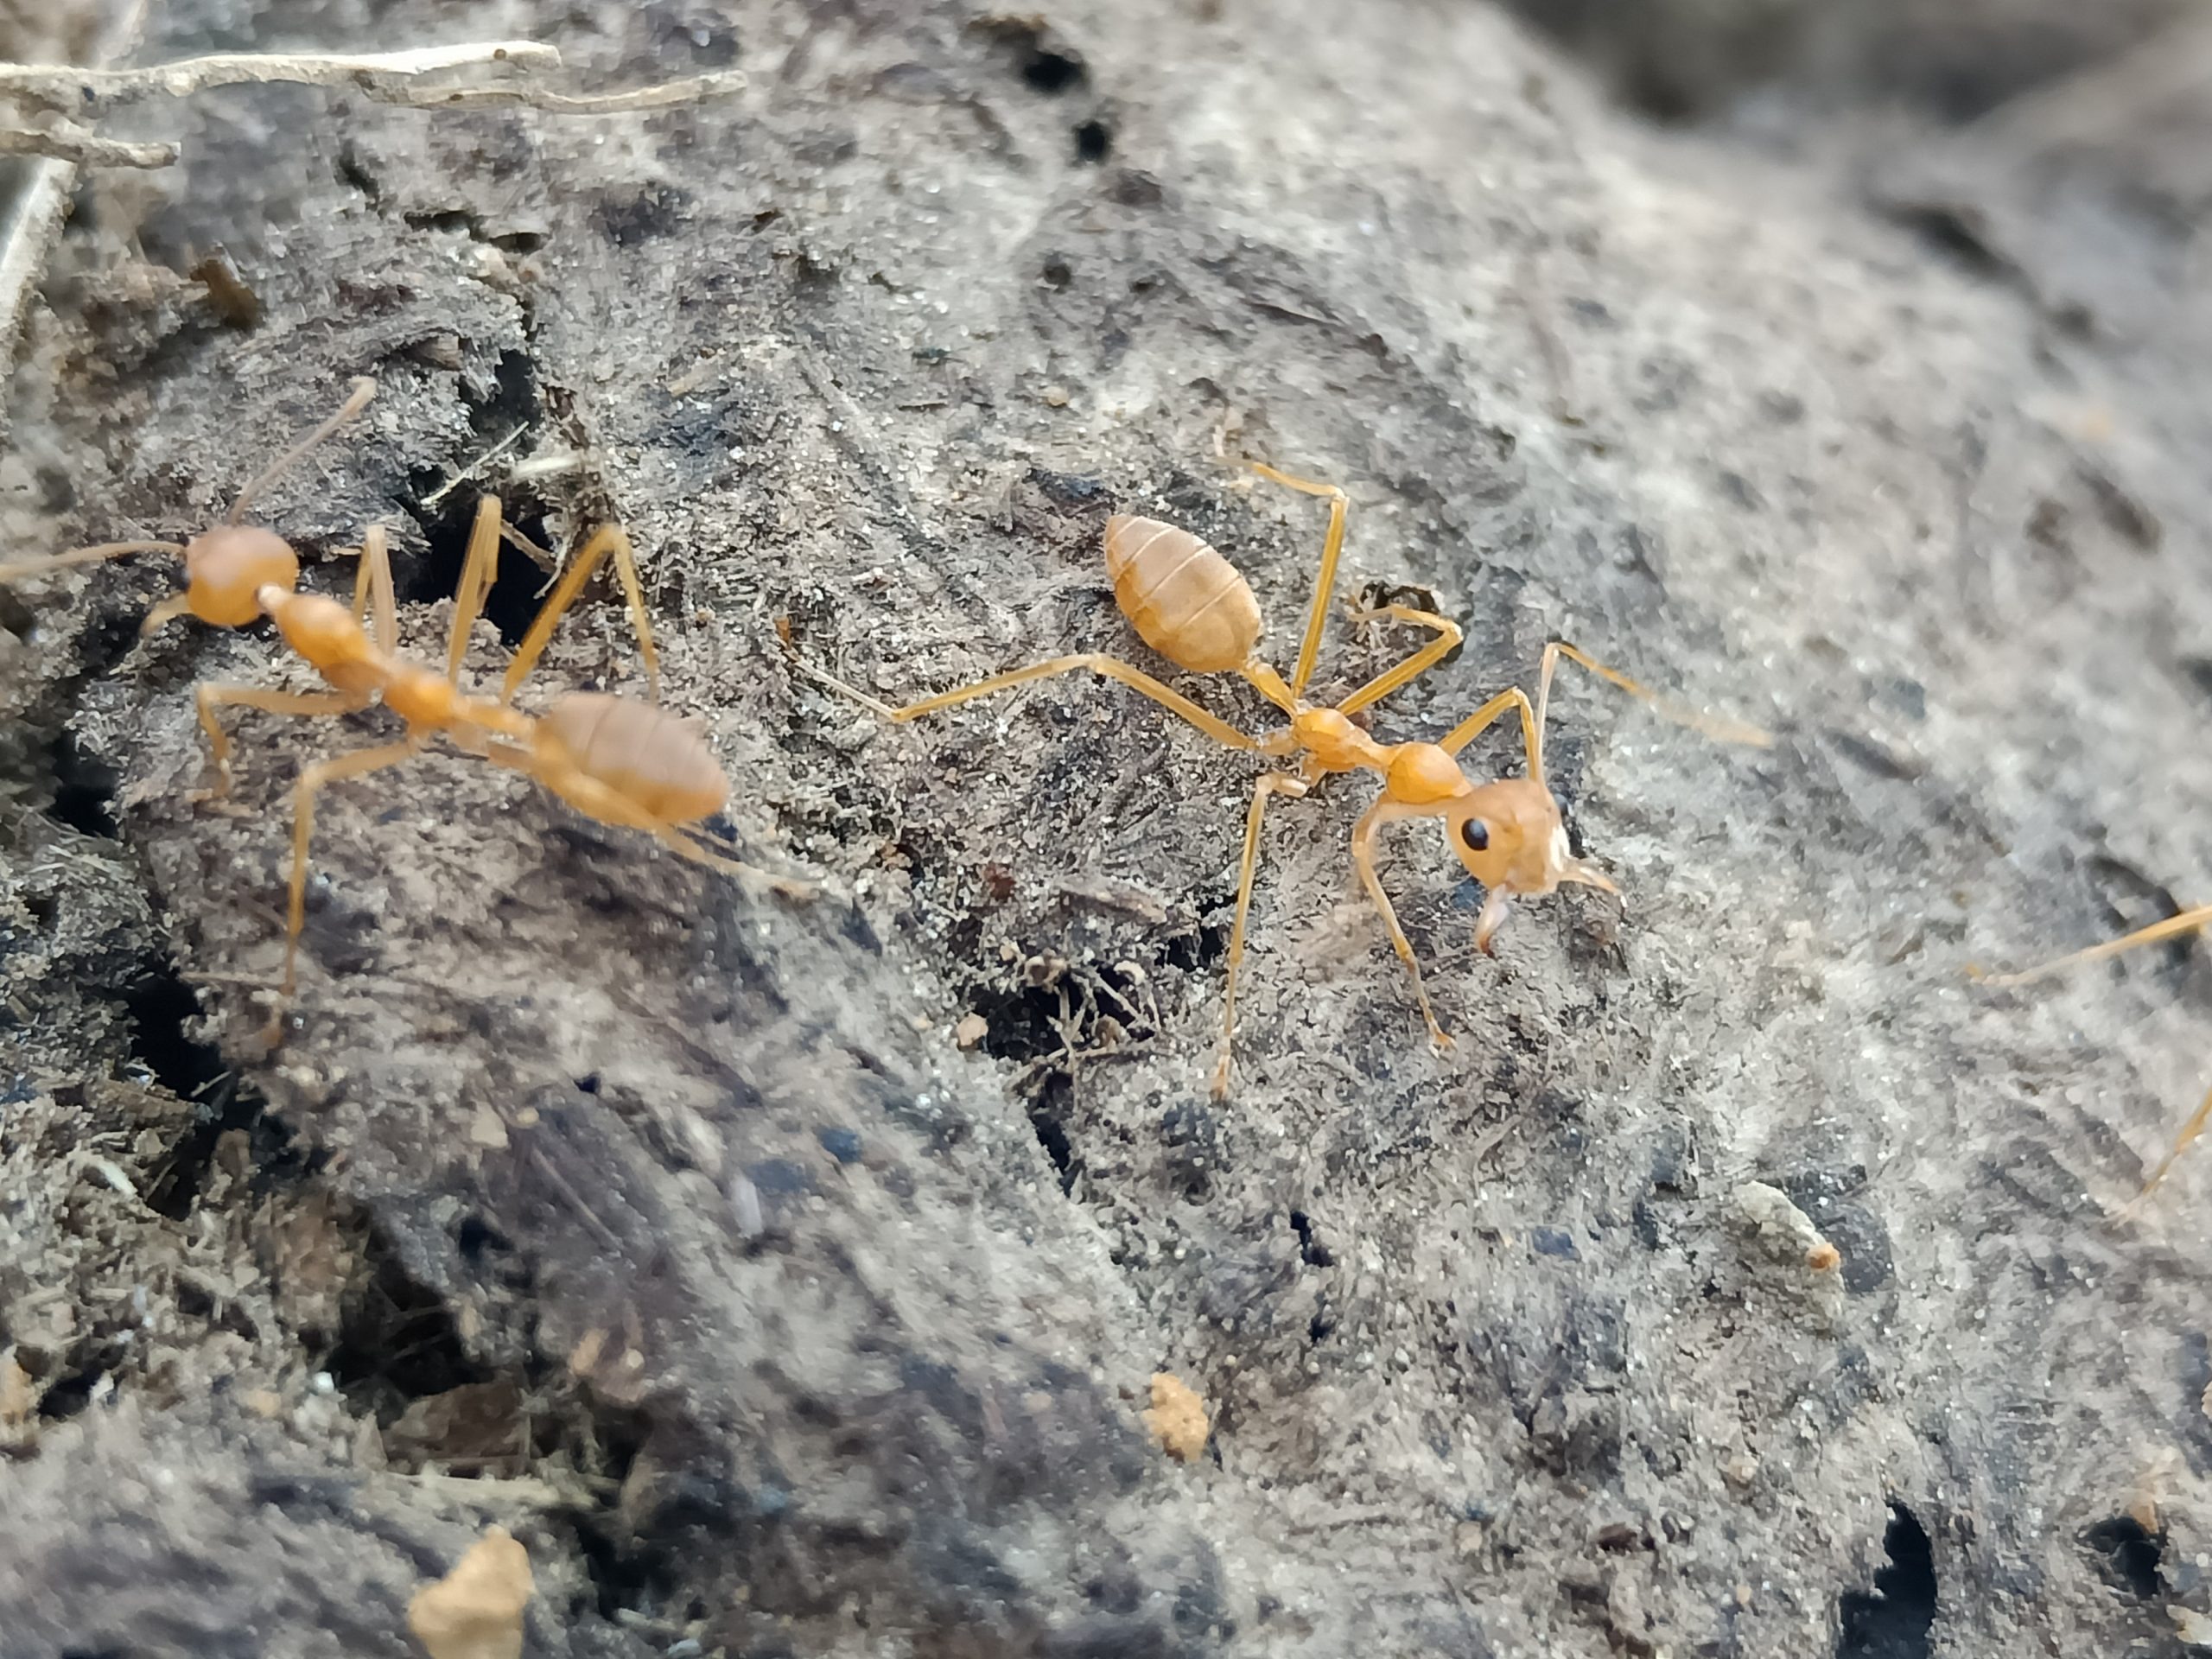 Ants at a rock